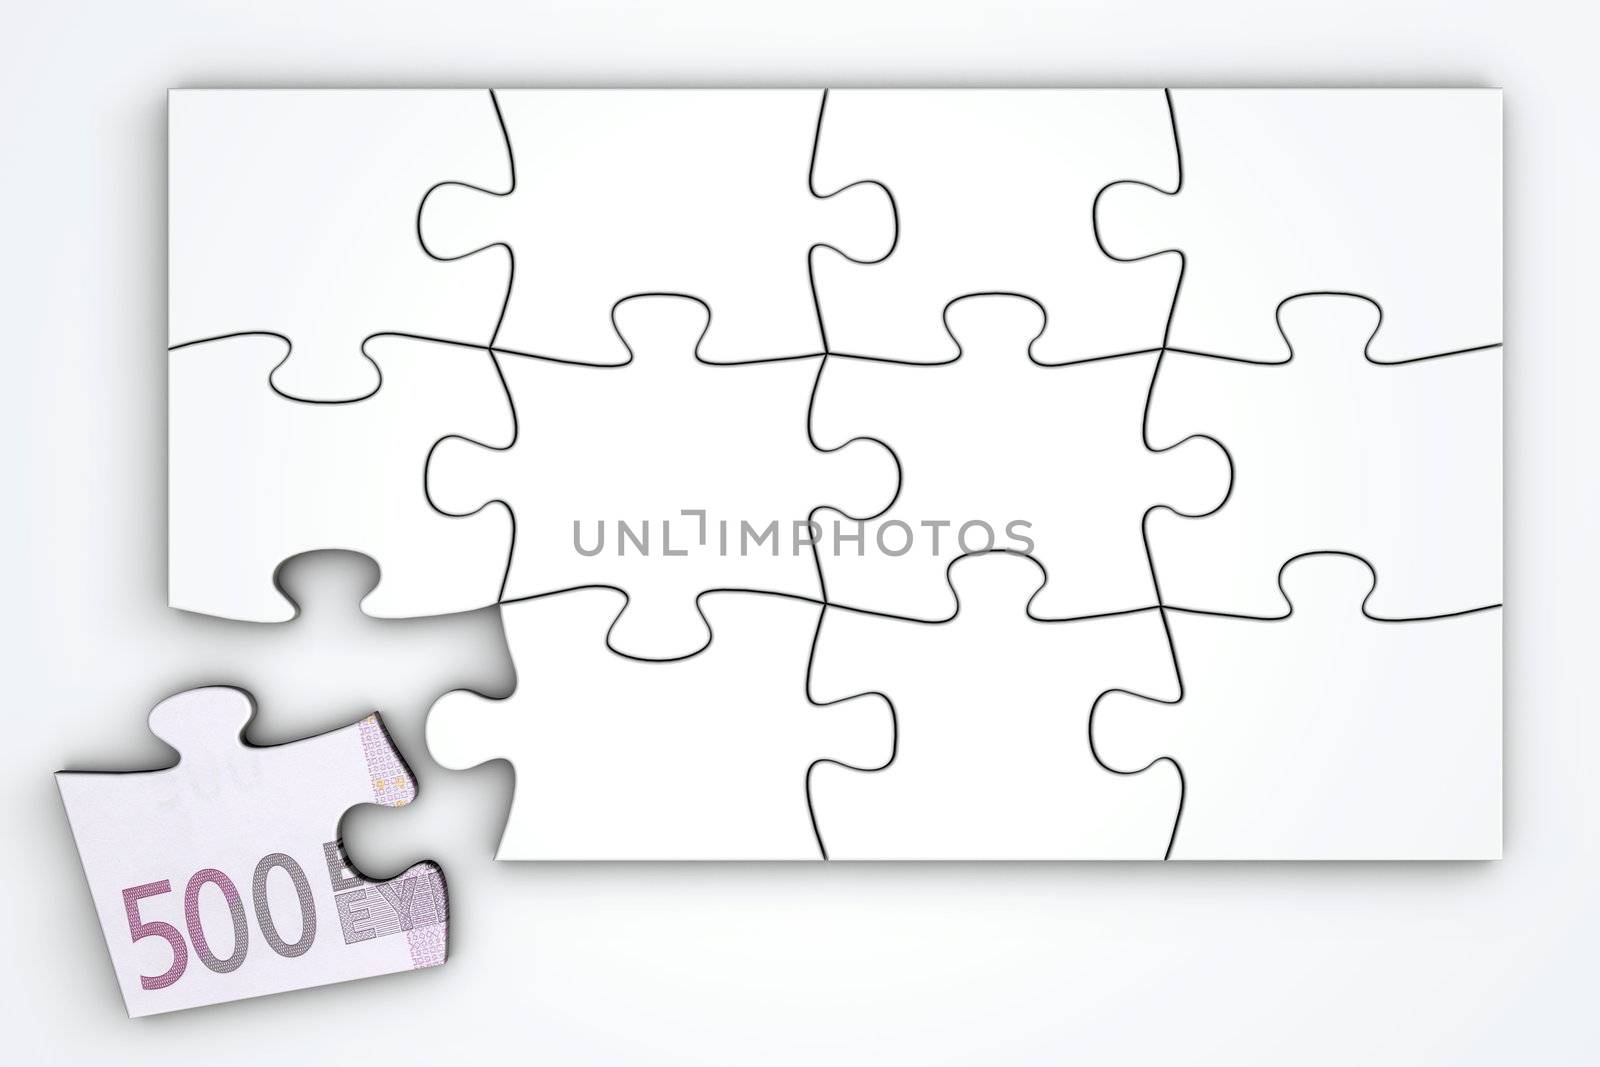 white puzzle template - one piece with 500 Euro note separately - top view